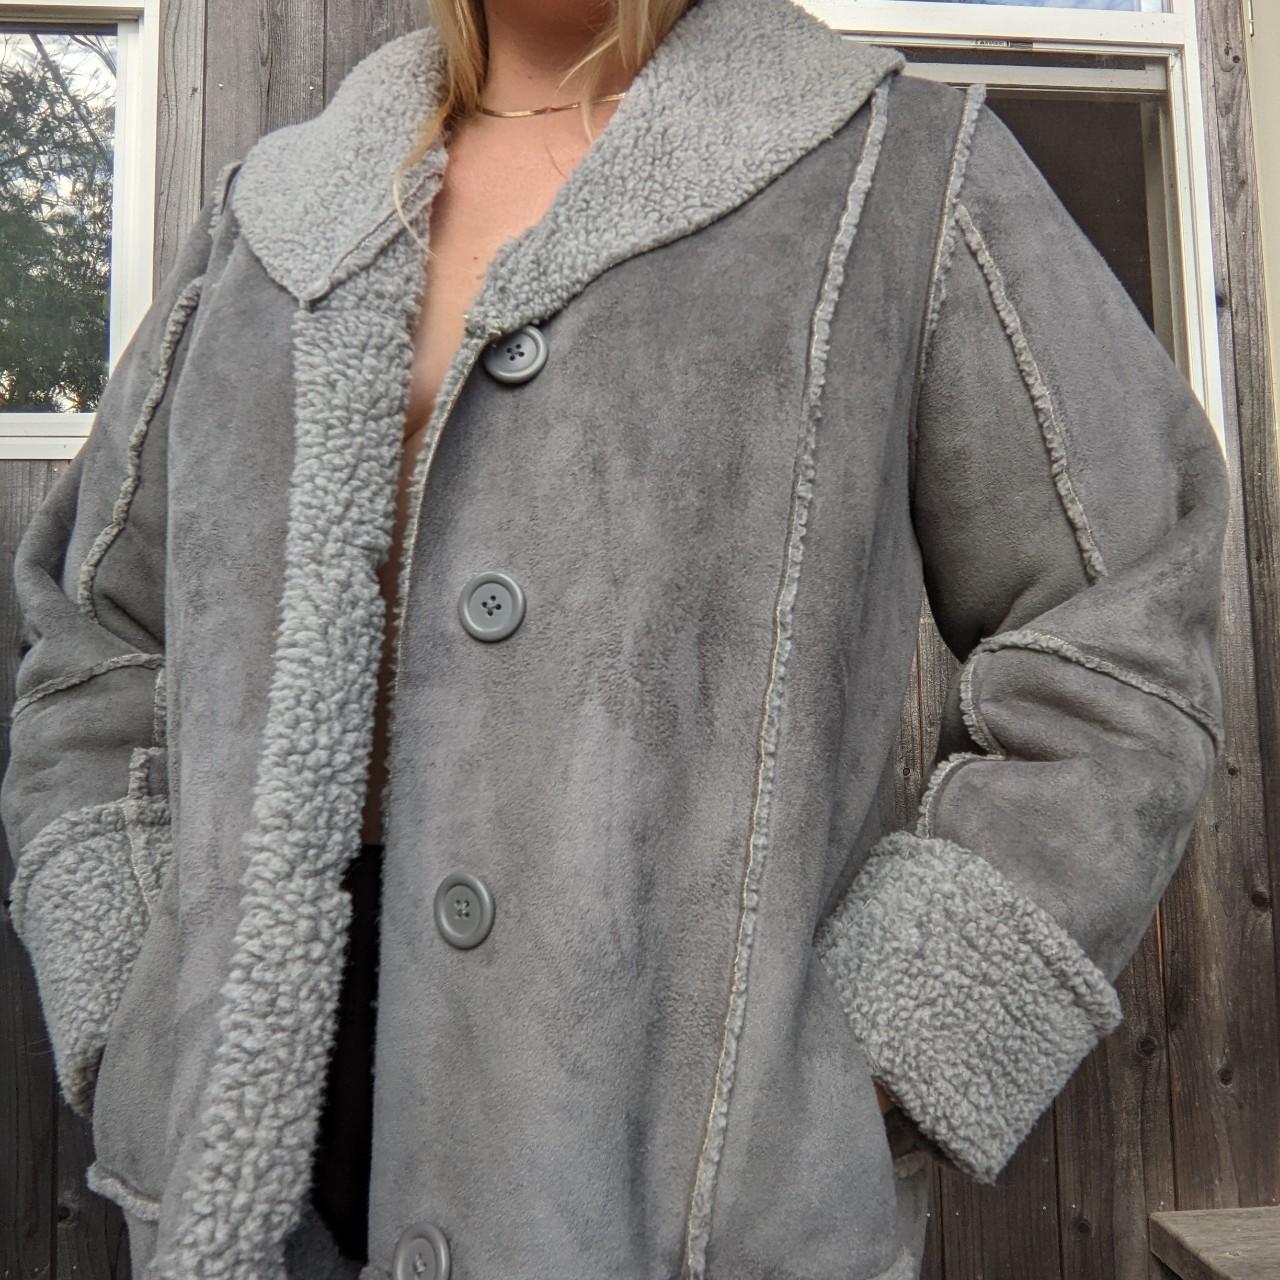 Product Image 3 - Penny Lane Coat

Brand is: Jessica